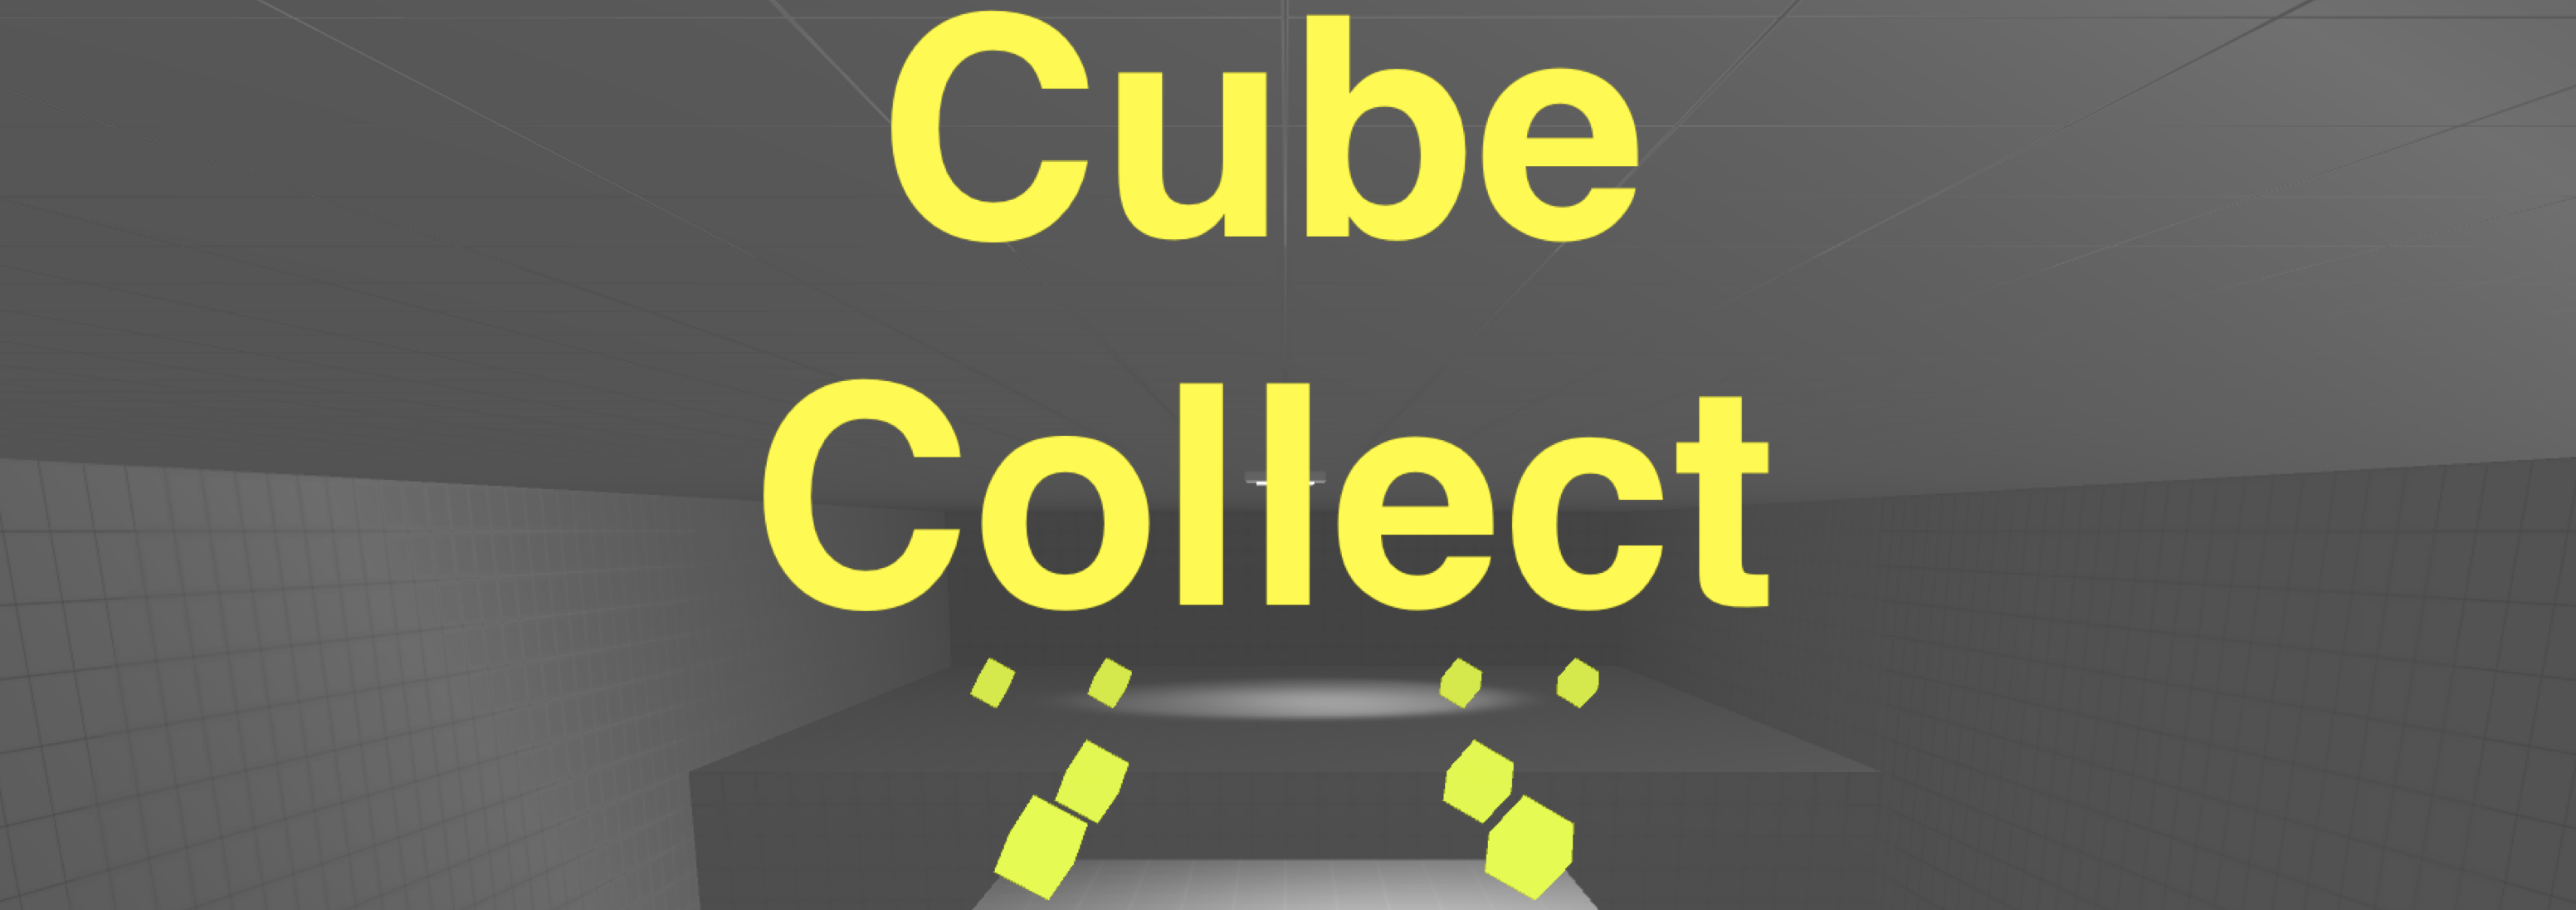 Cube Collect